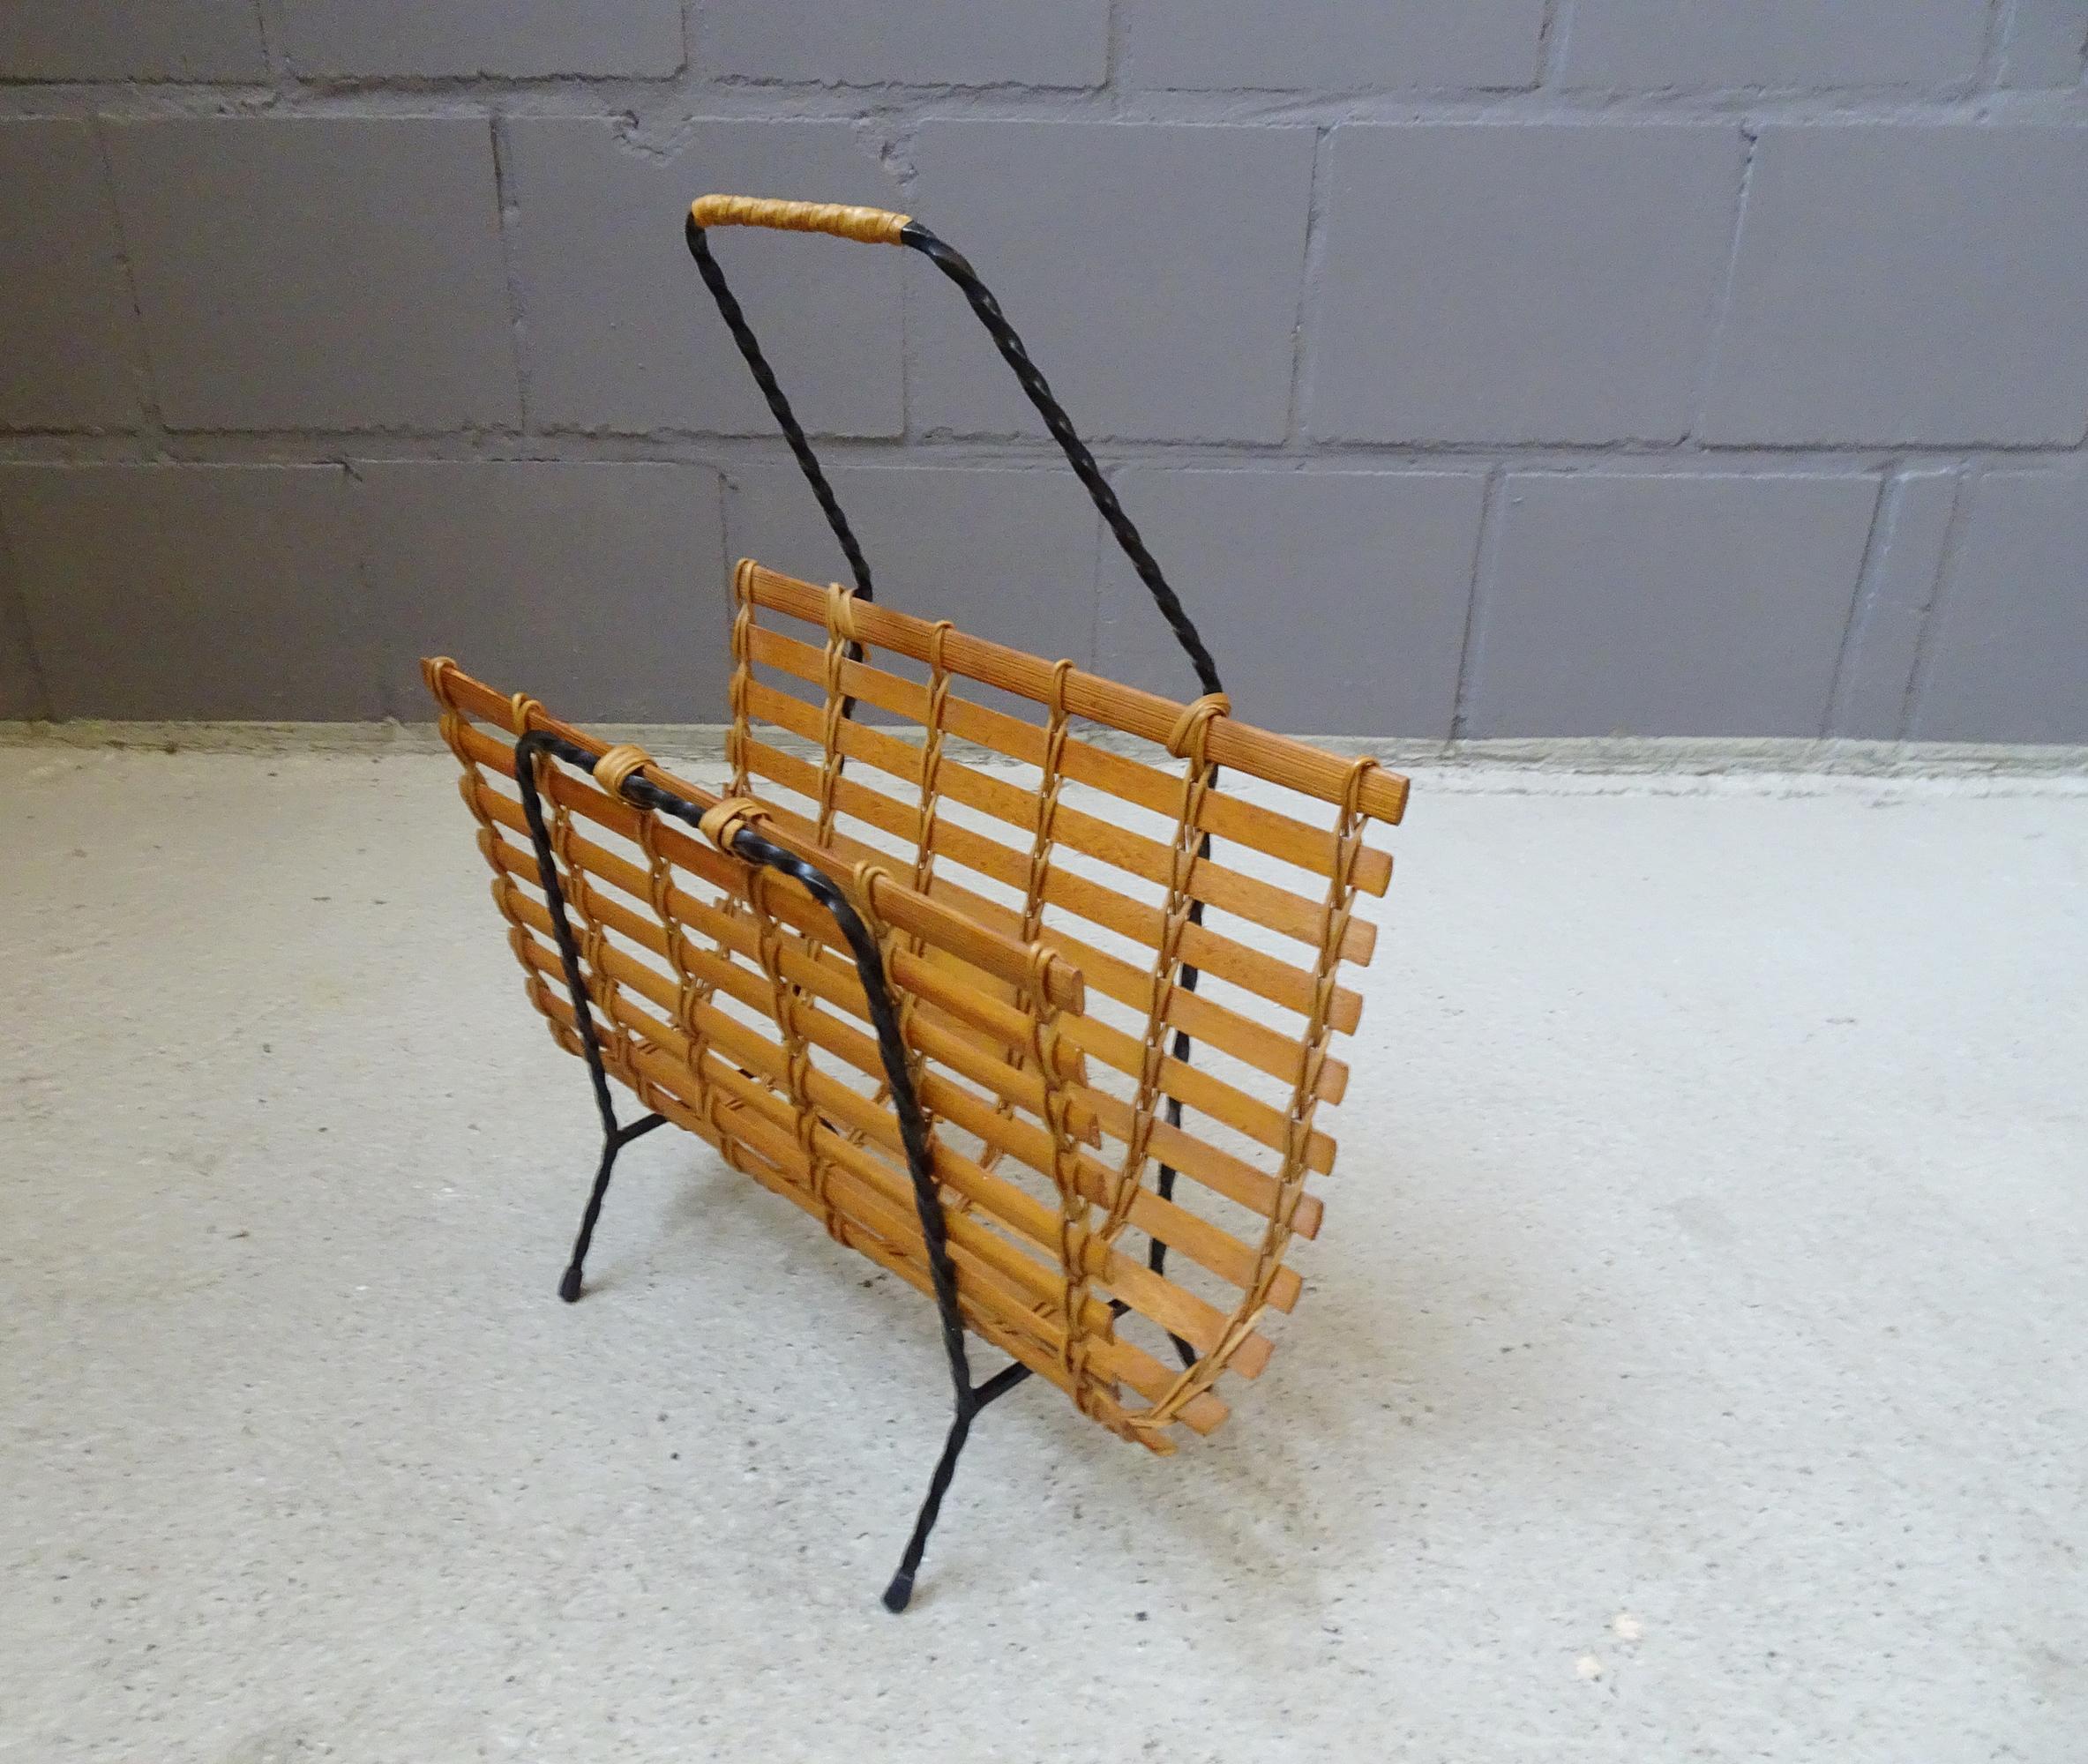 Large mid-century magazine rack made of twisted iron, narrow wooden slats, and rattan. Minimalist 1960s design made from natural materials. The raised handle, which gives it a unique look, is particularly characteristic.

A timeless classic for